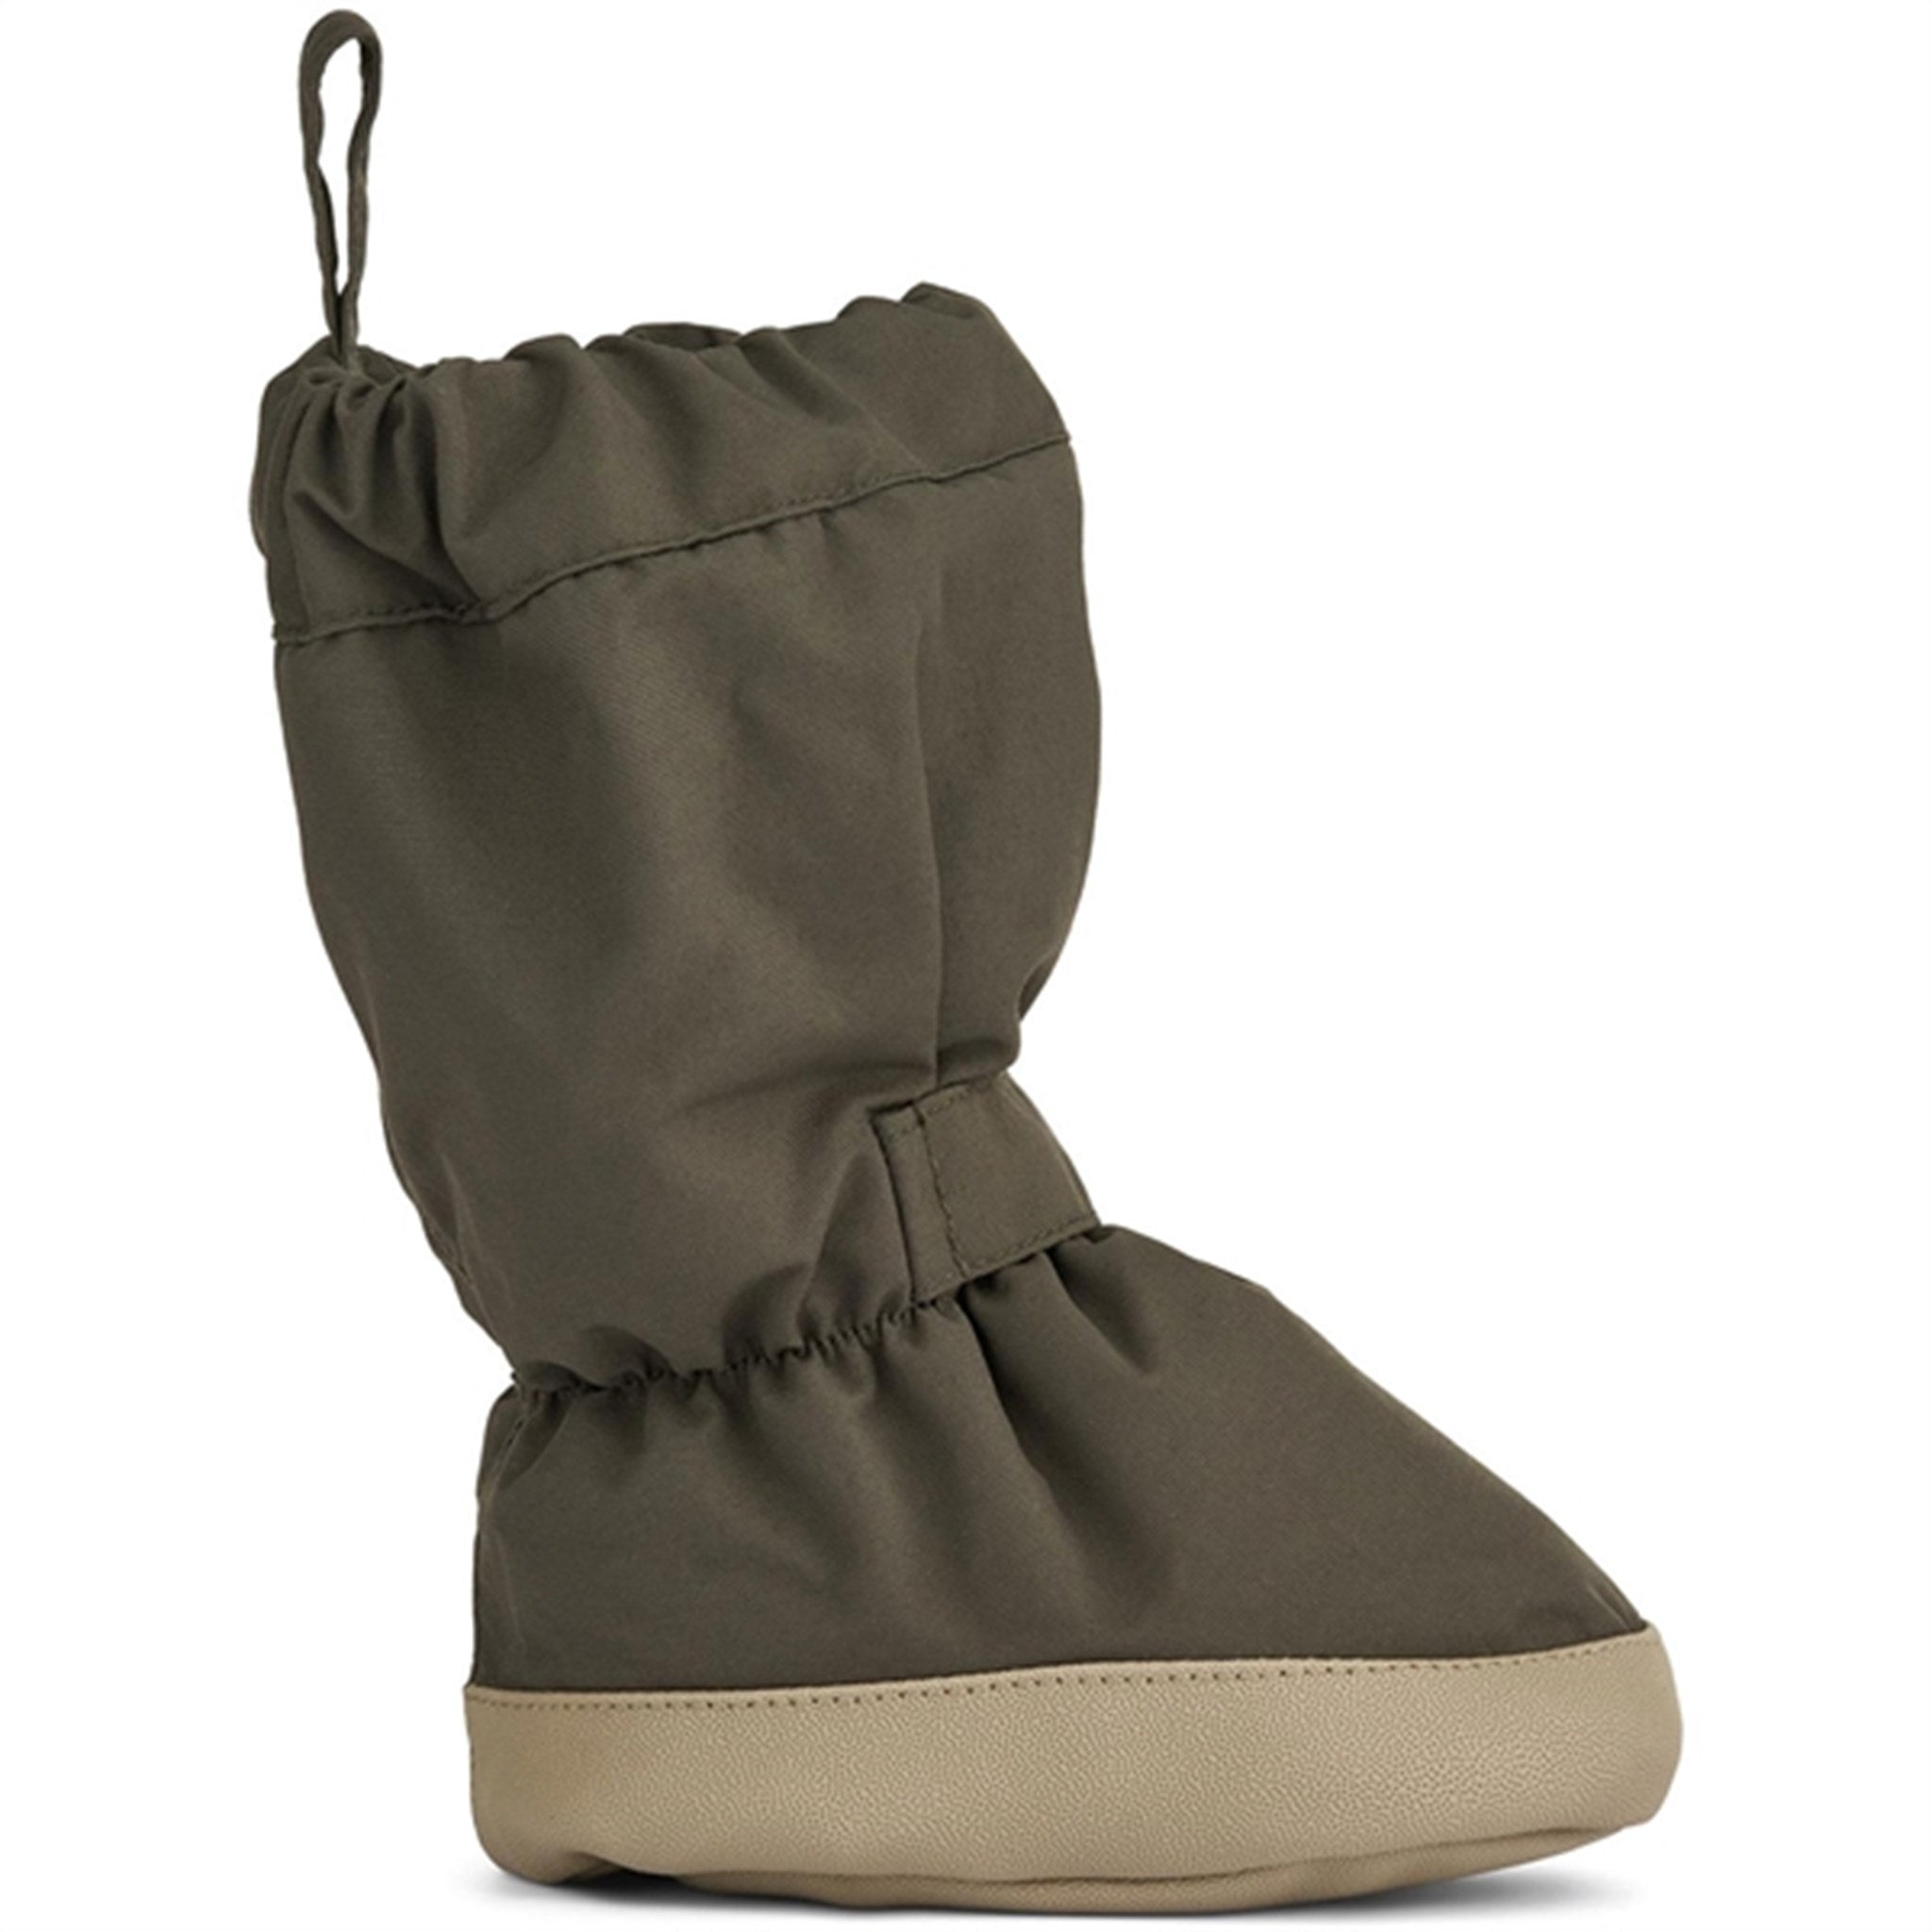 Wheat Outerwear Booties Tech Dry Black 3